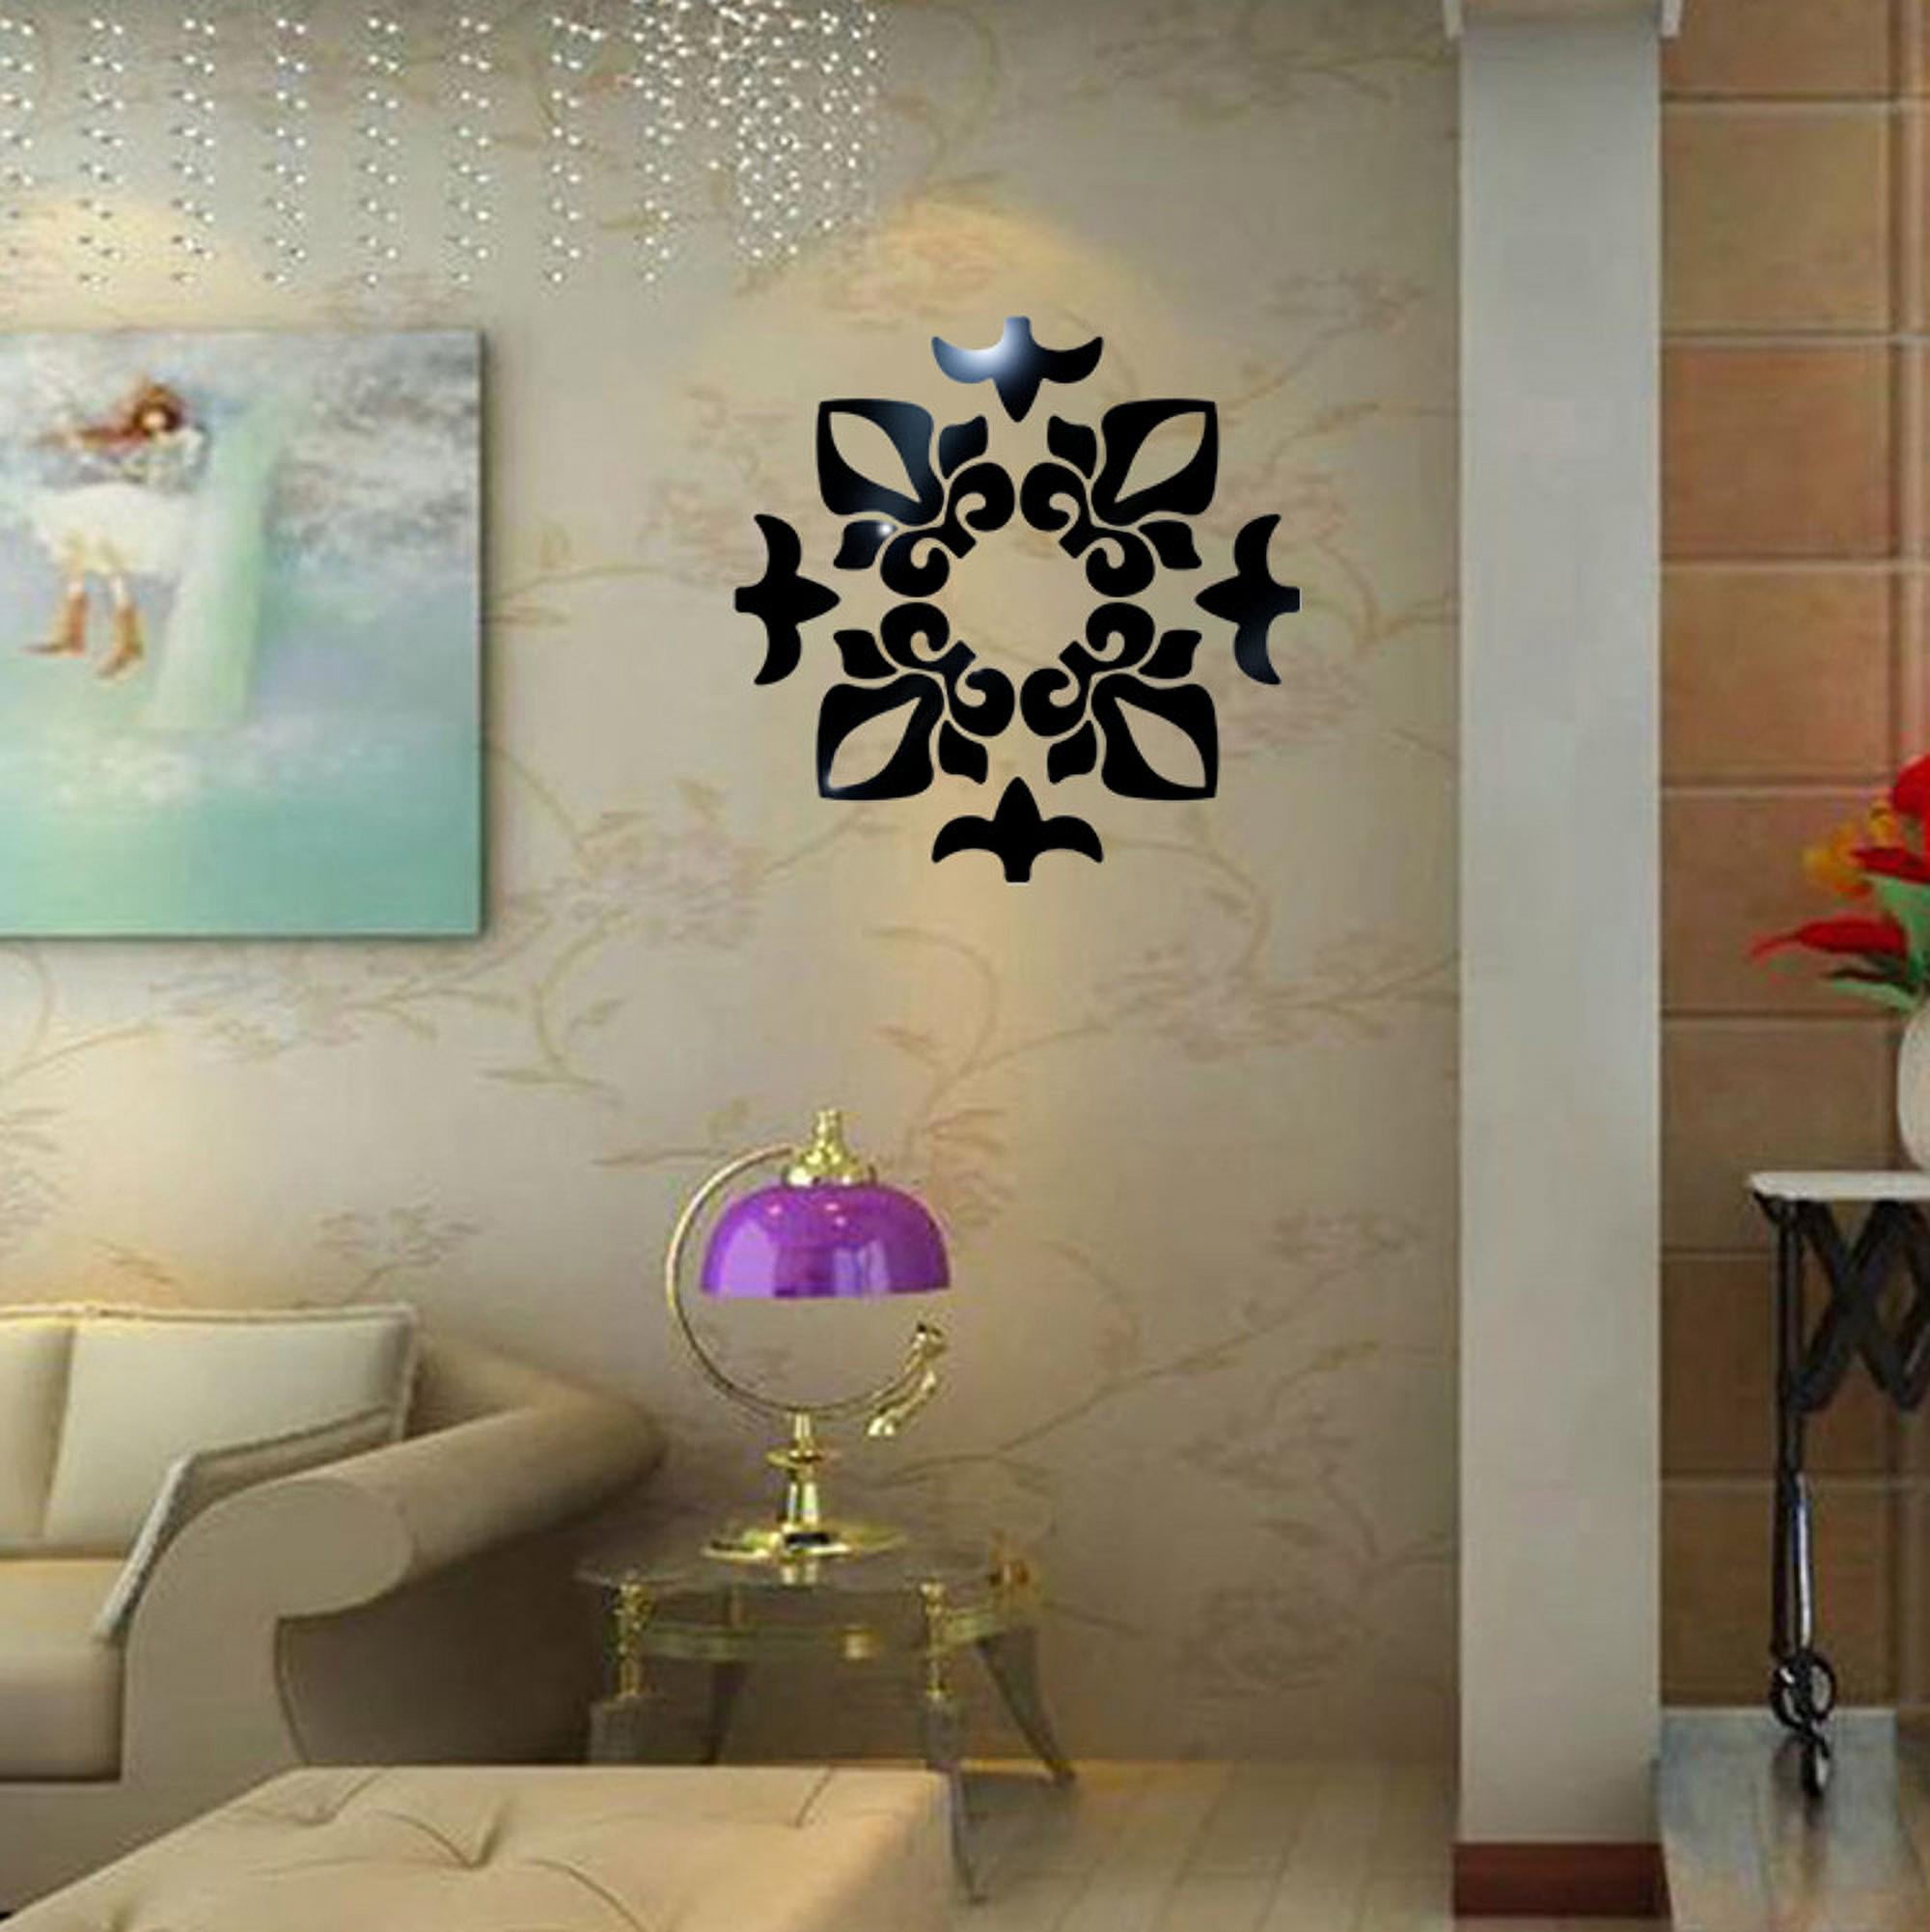 in The Dark for Ceiling Circle Stick on Mirrors for Wall Wall Wall Affixed  Mobile With Decorative Decoration Window Decor Wall Stickers Dance 3d Wall  Papers 